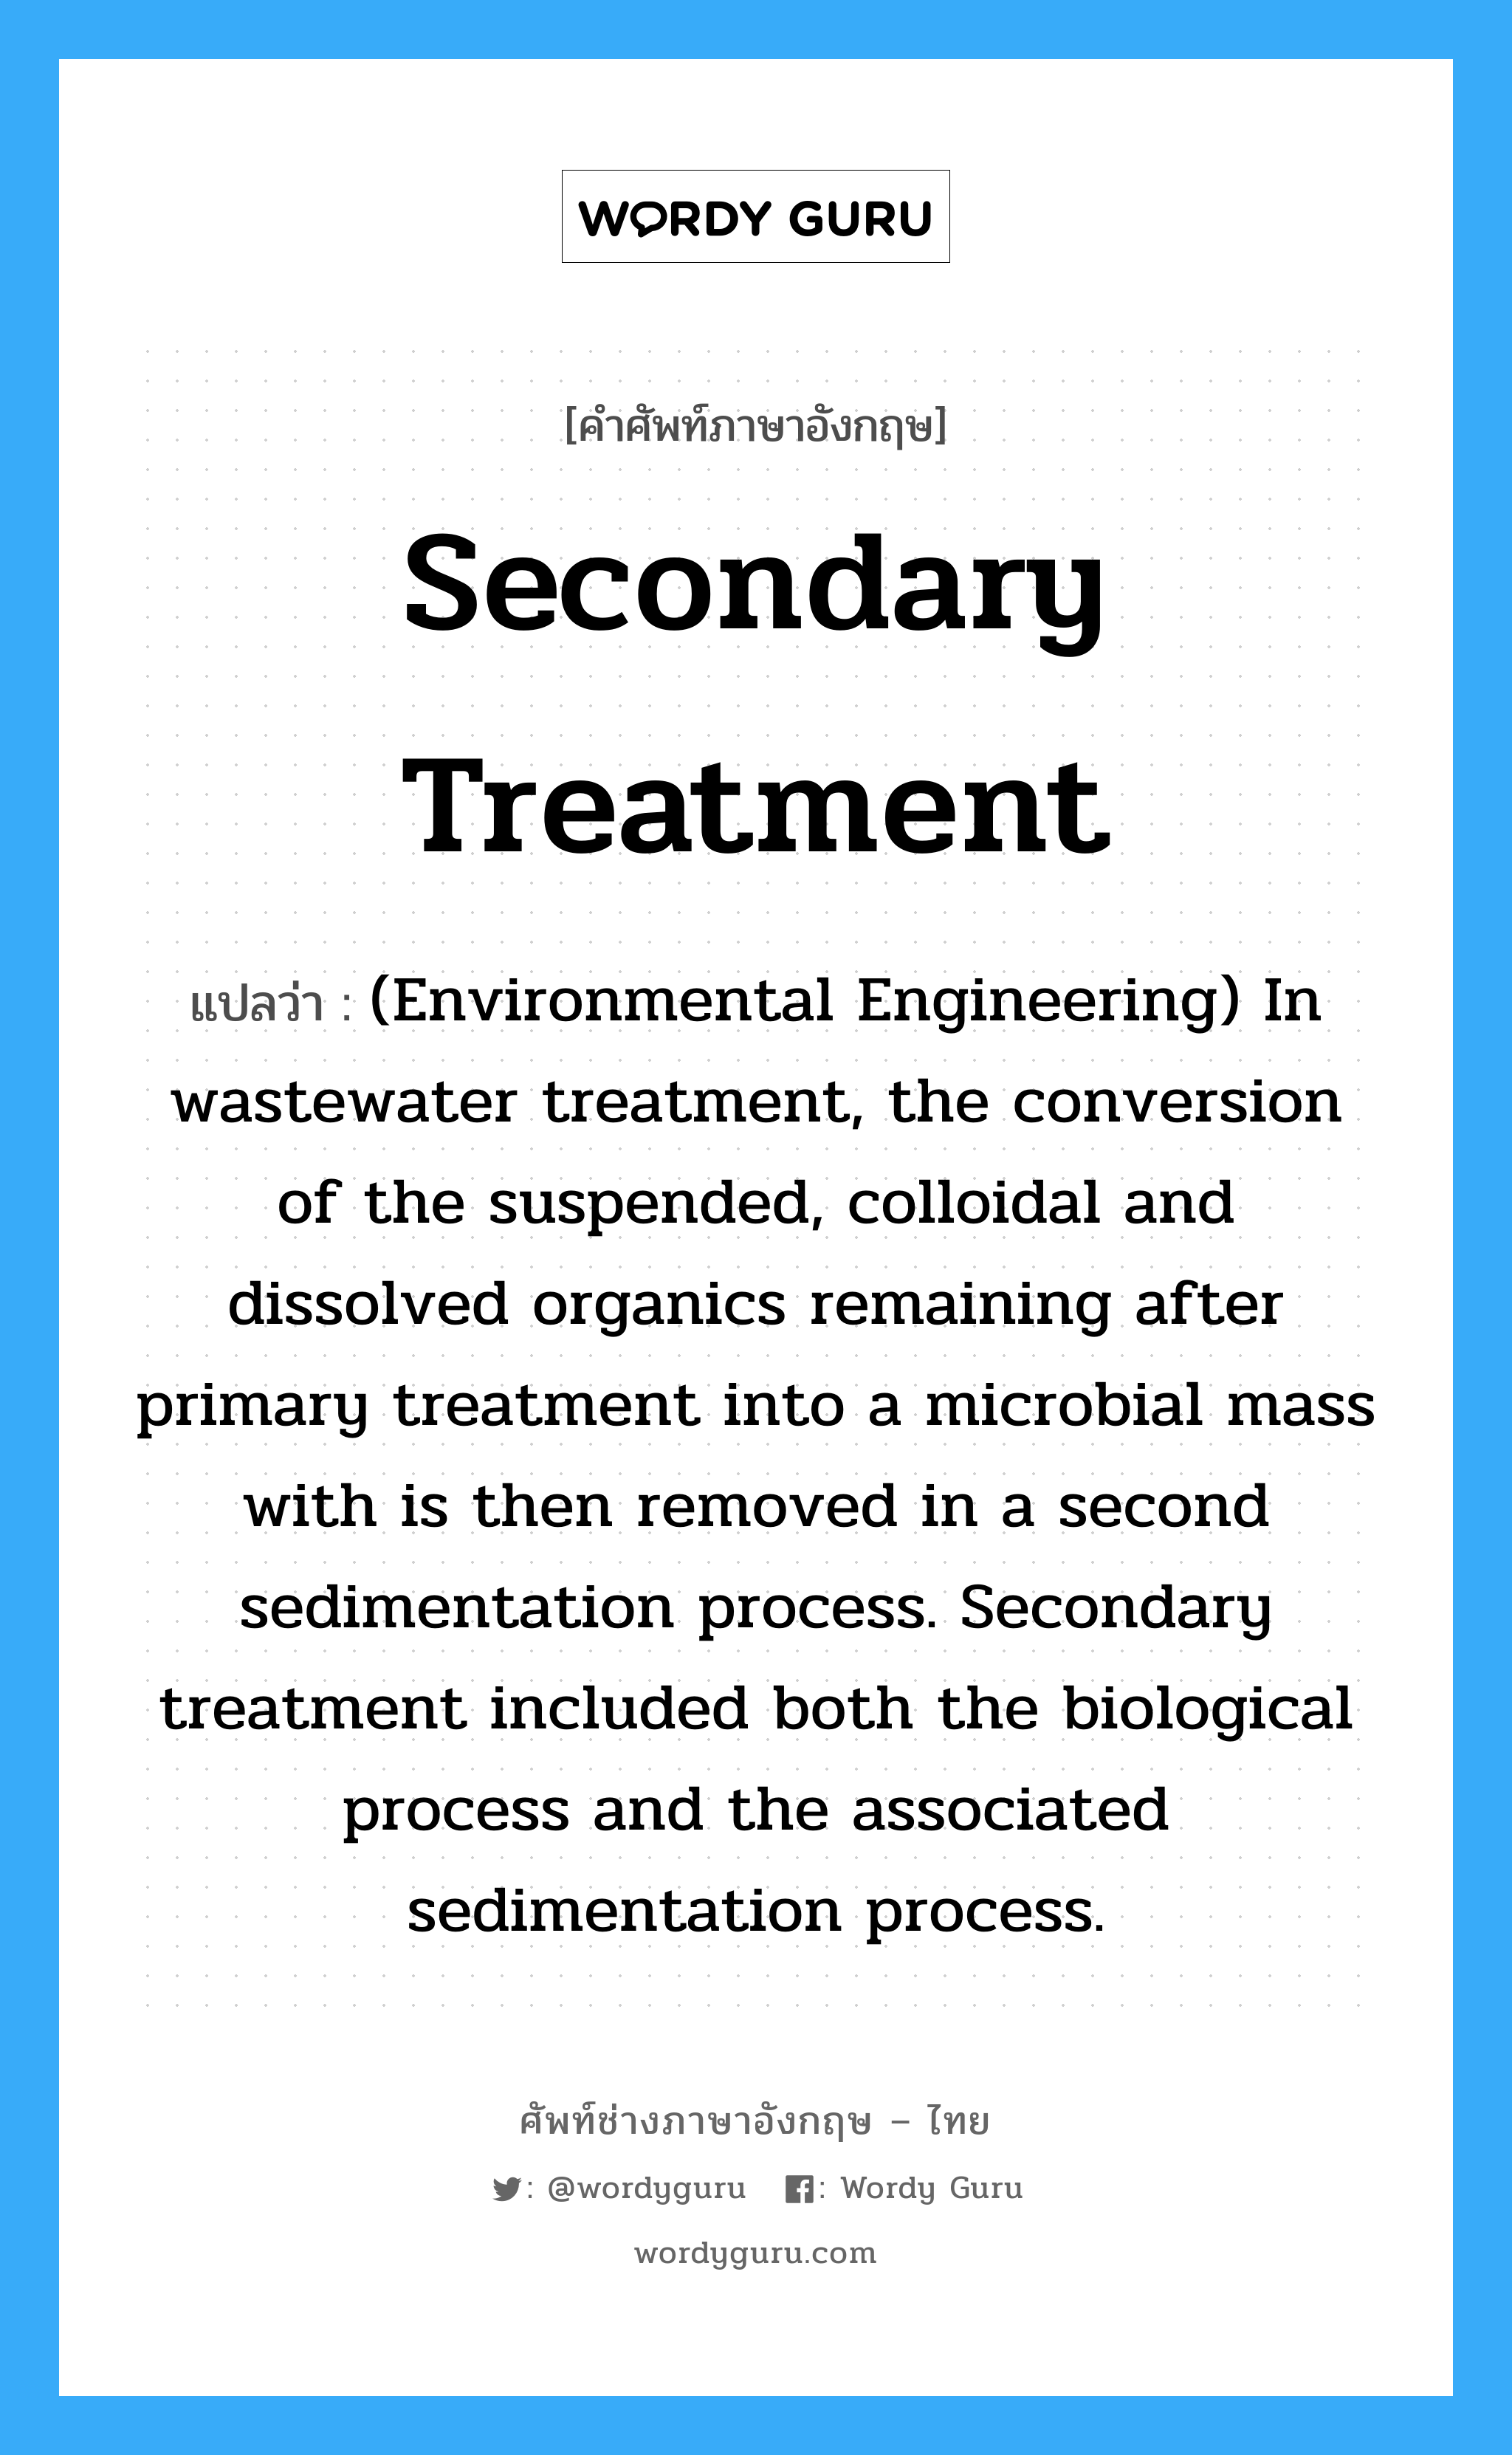 Secondary treatment แปลว่า?, คำศัพท์ช่างภาษาอังกฤษ - ไทย Secondary treatment คำศัพท์ภาษาอังกฤษ Secondary treatment แปลว่า (Environmental Engineering) In wastewater treatment, the conversion of the suspended, colloidal and dissolved organics remaining after primary treatment into a microbial mass with is then removed in a second sedimentation process. Secondary treatment included both the biological process and the associated sedimentation process.